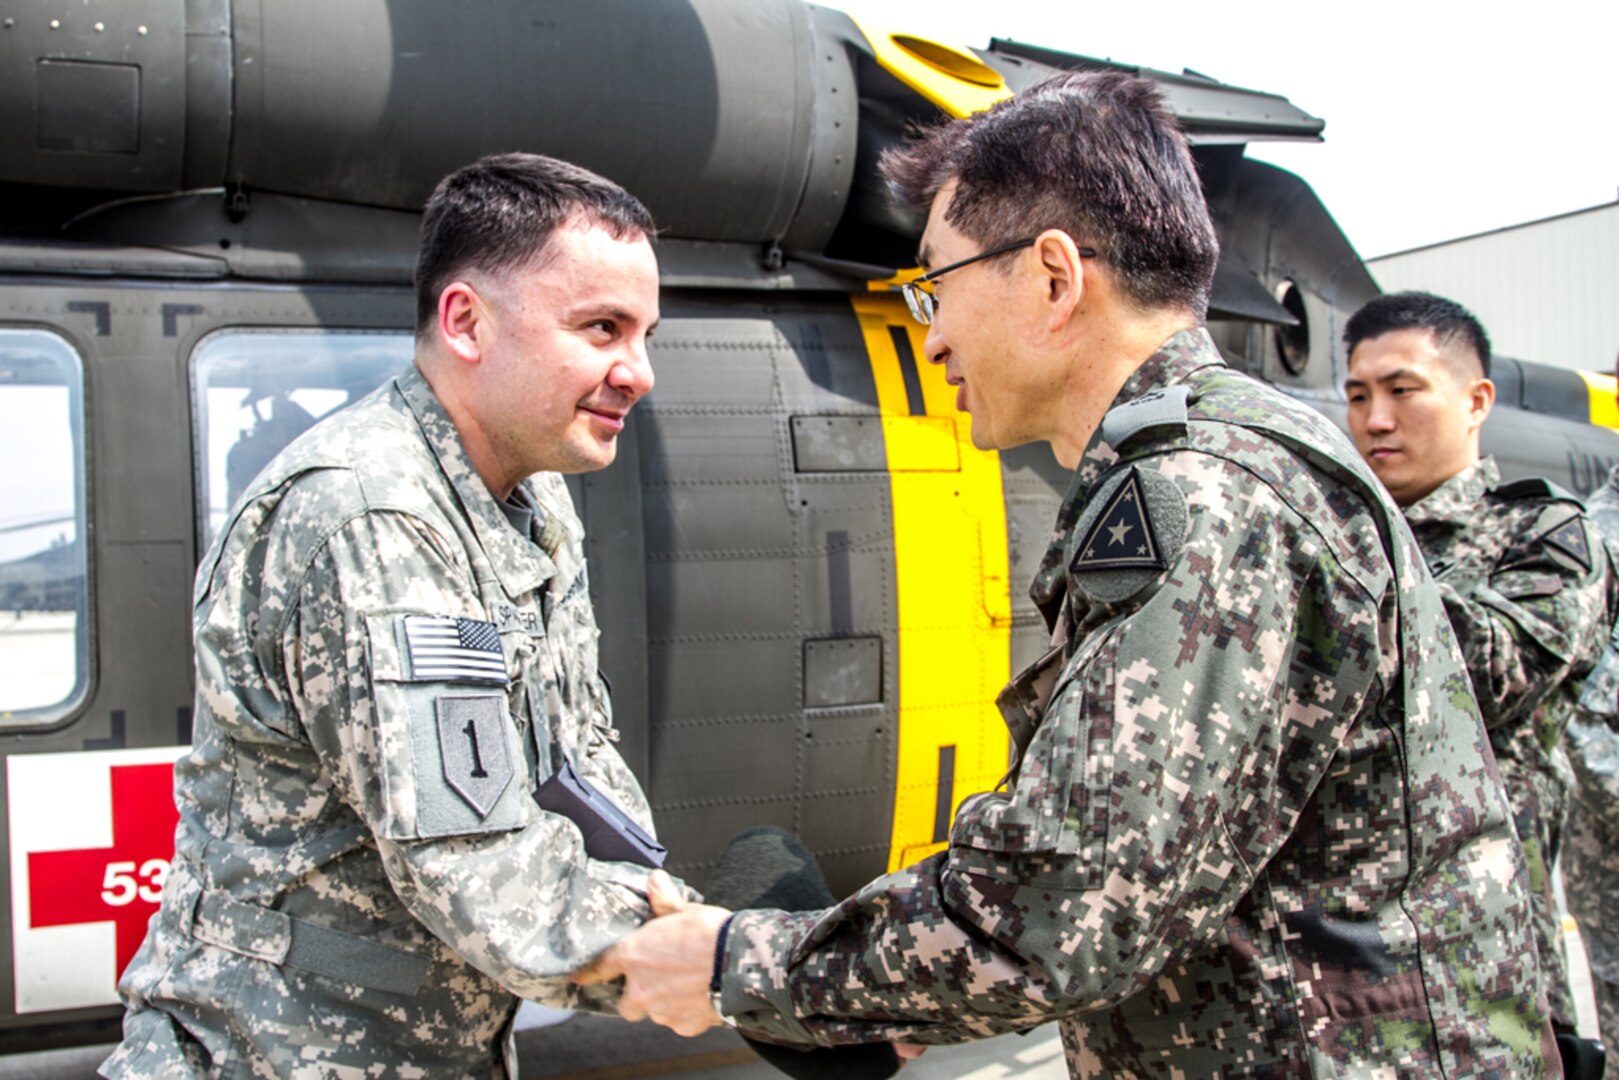 In this file photo, a Soldier from the Company C, 3rd General Support Aviation Battalion shakes hands with Brig. Gen. Ahn, a ROKA surgeon general, April 8, at the Super Hangar on Camp Humphreys in South Korea. Ahn was their to view the 3rd General Support Aviation Battalion's medevac capabilities.